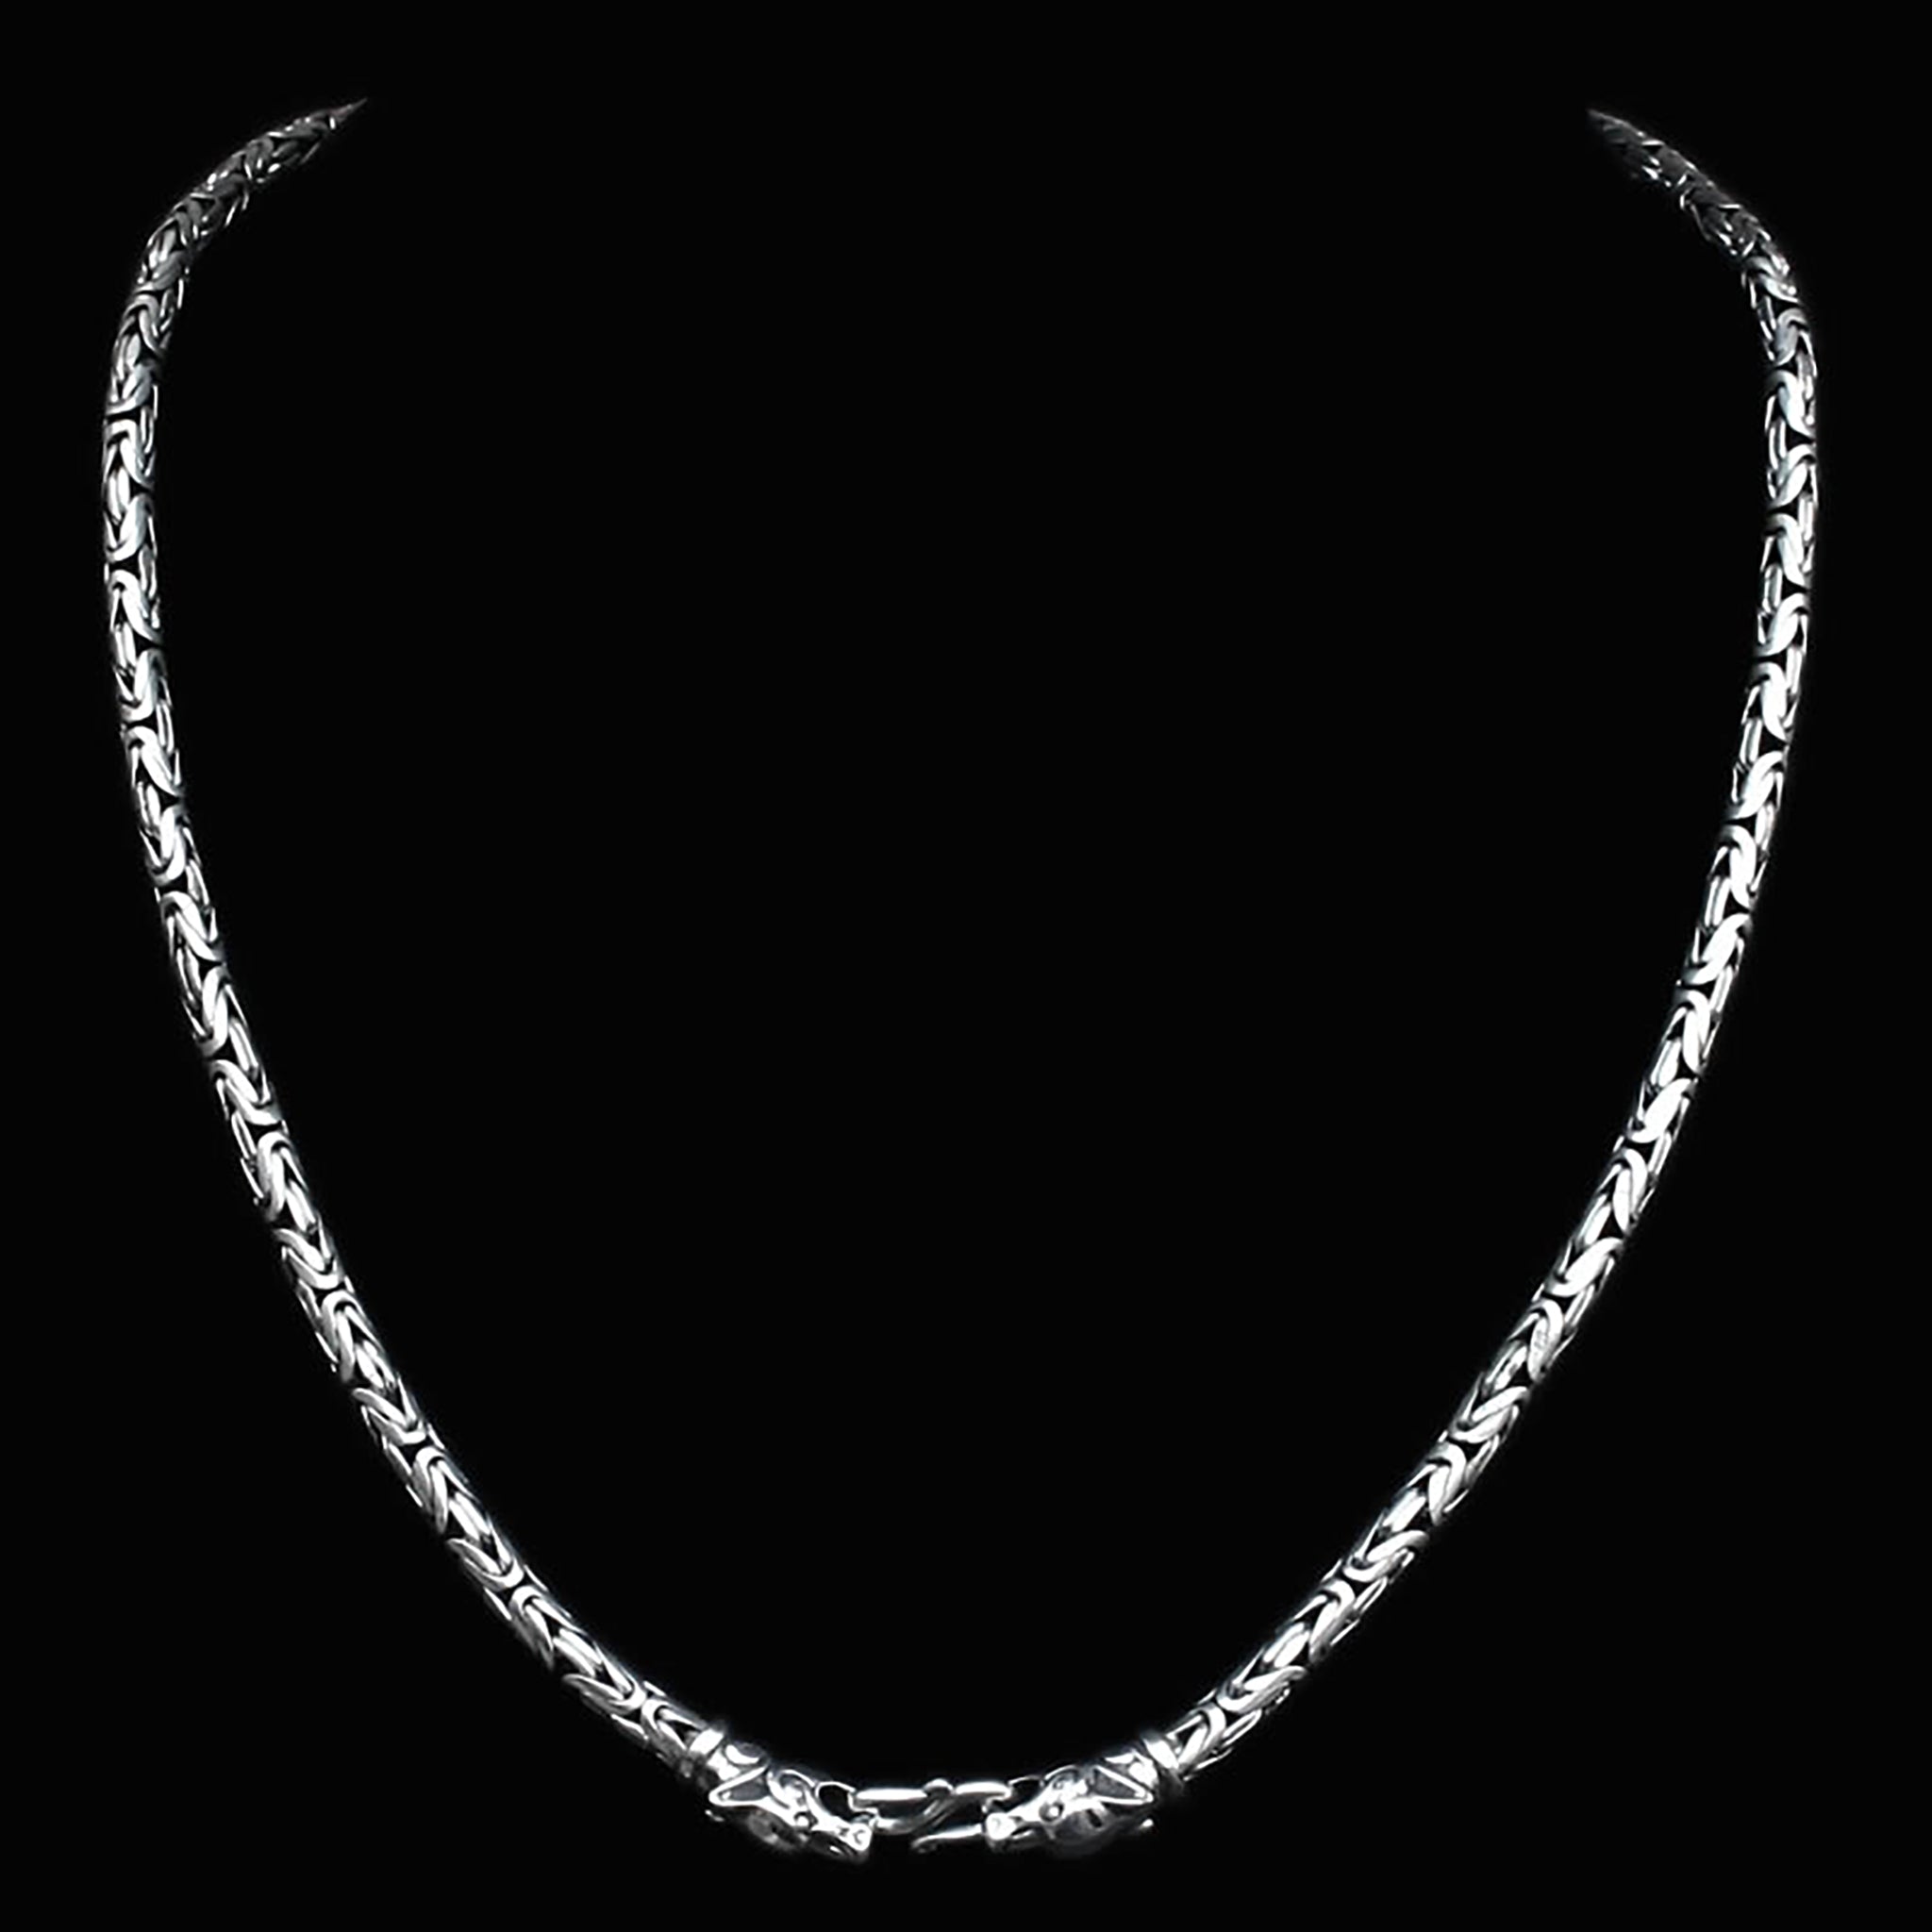 8mm Silver Snake Thors Hammer Necklace - Ferocious Wolf Heads